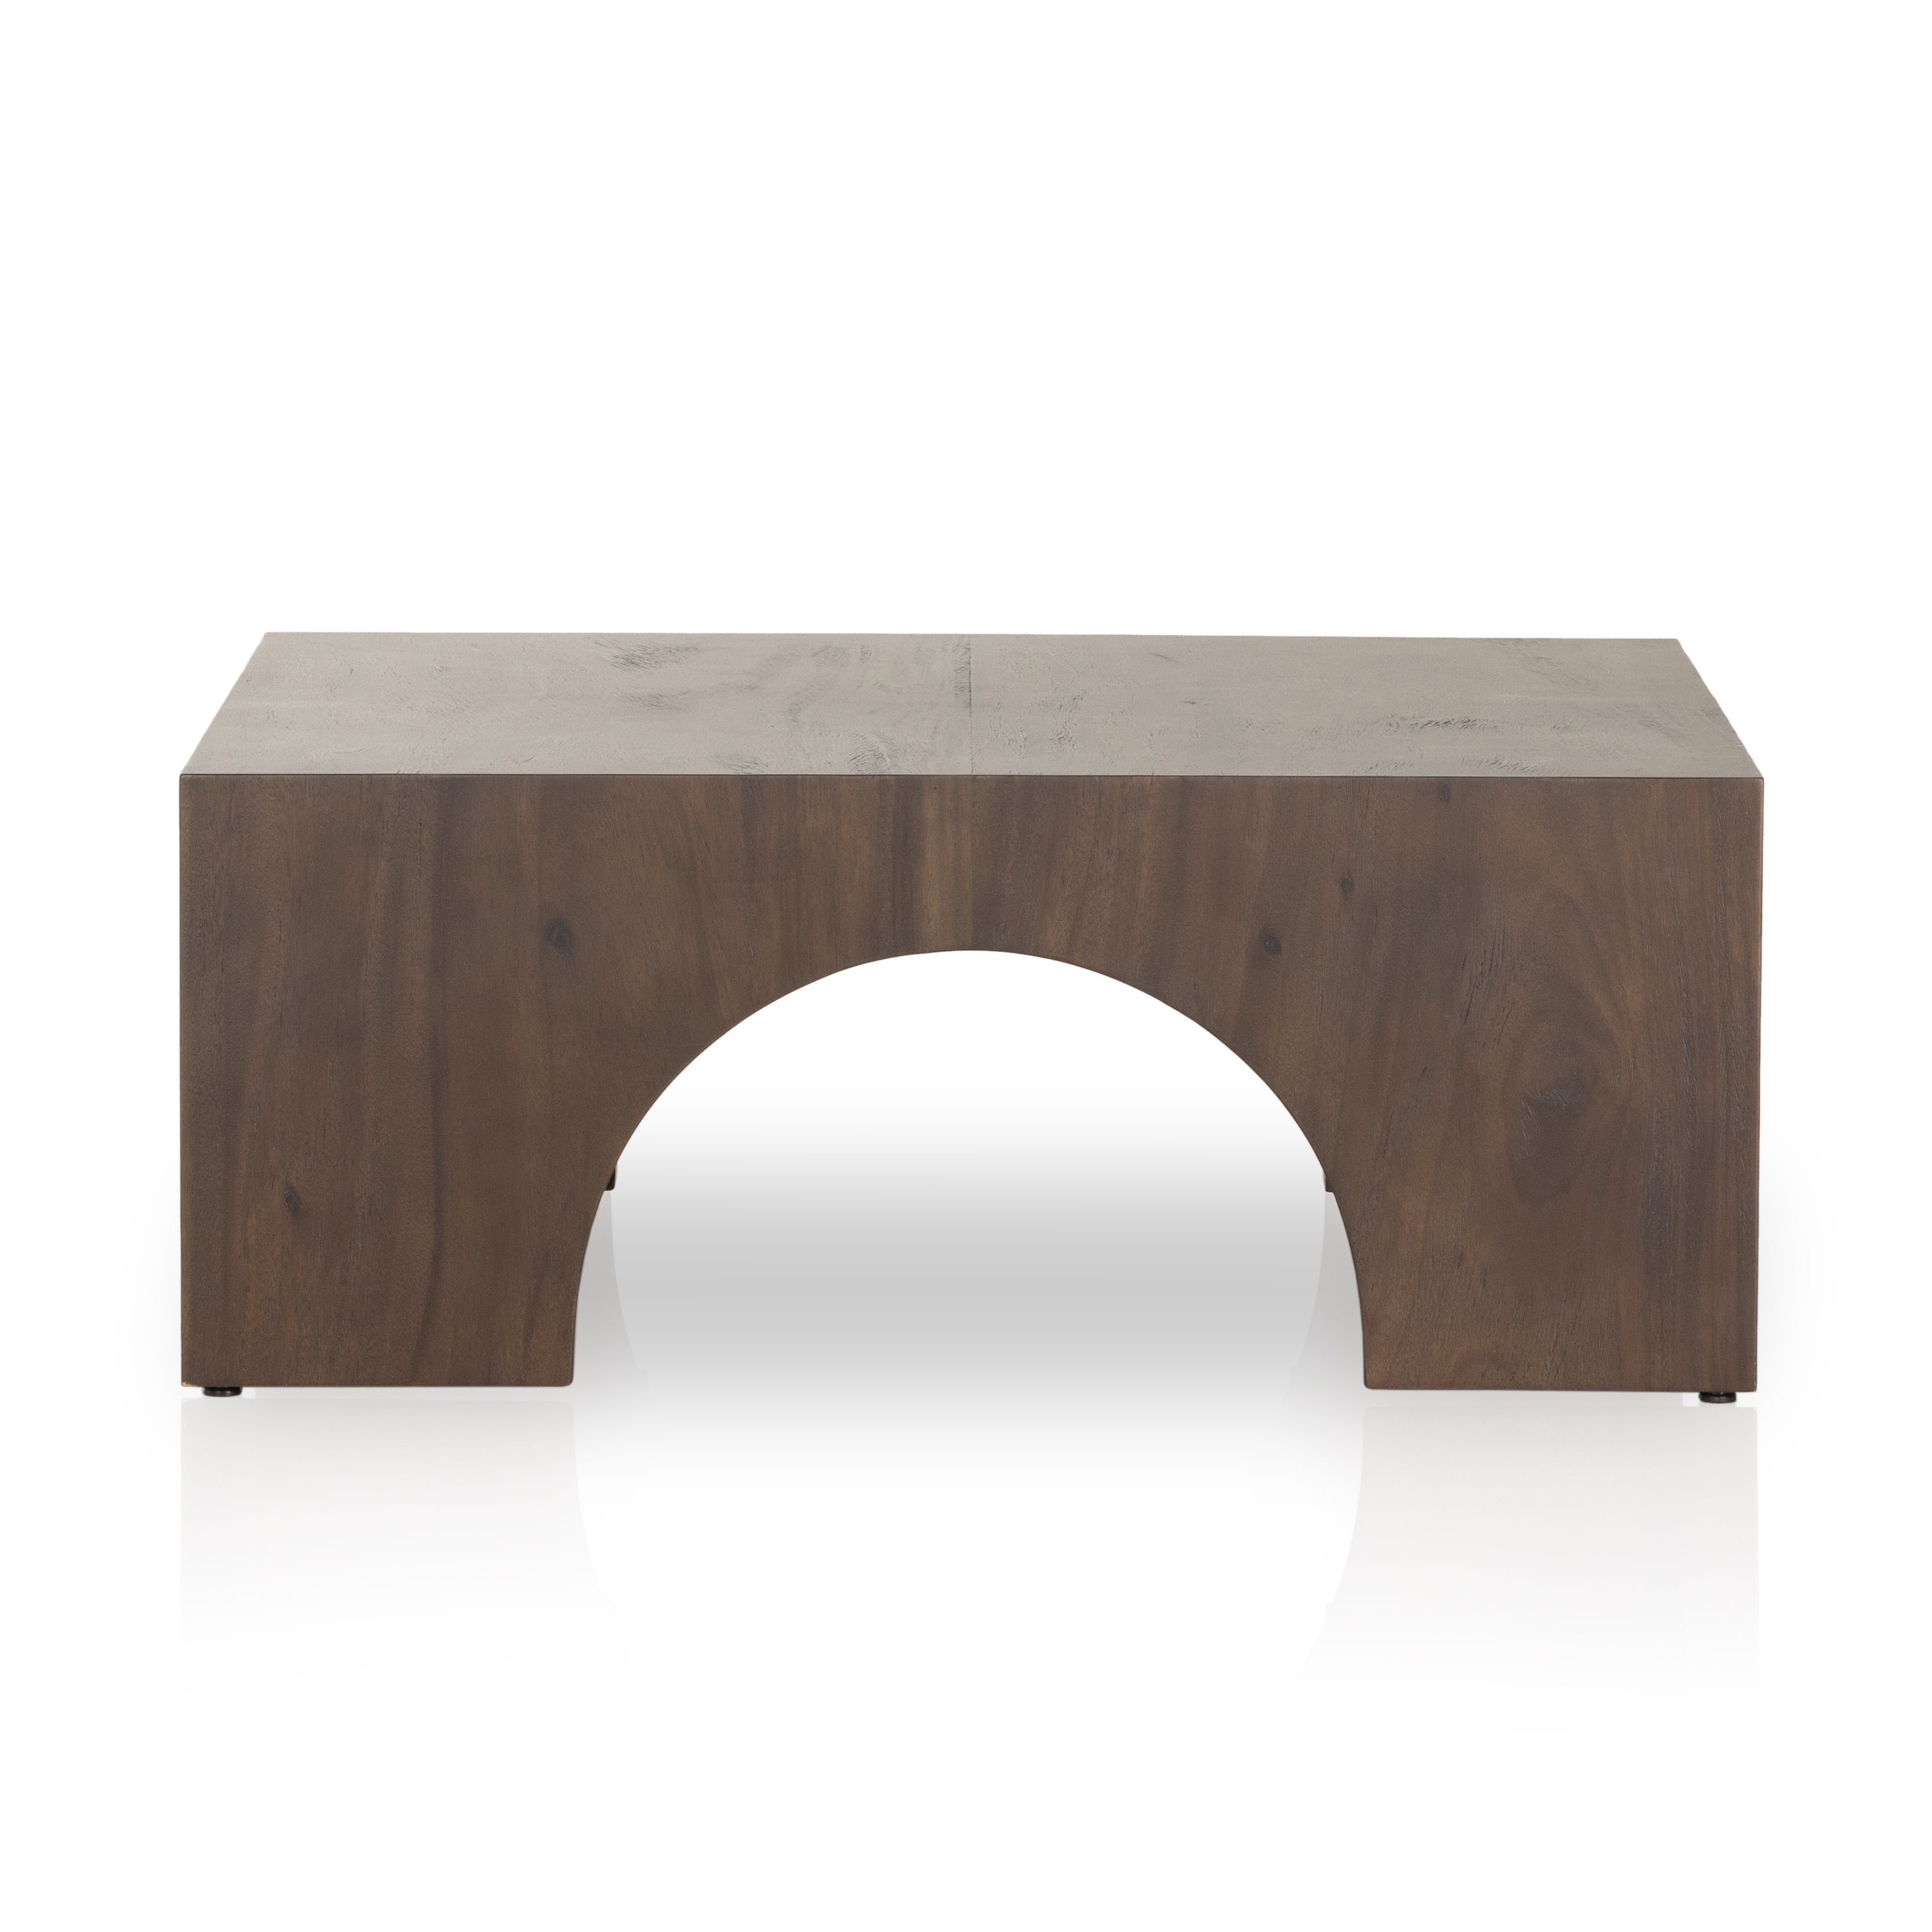 Clean and simple, with great impact. Made from beautiful Guanacaste in a natural hue, shapely arches and block corners speak to the architectural inspiration behind this eye-catching coffee table. Amethyst Home provides interior design, new construction, custom furniture, and area rugs in the San Diego metro area.